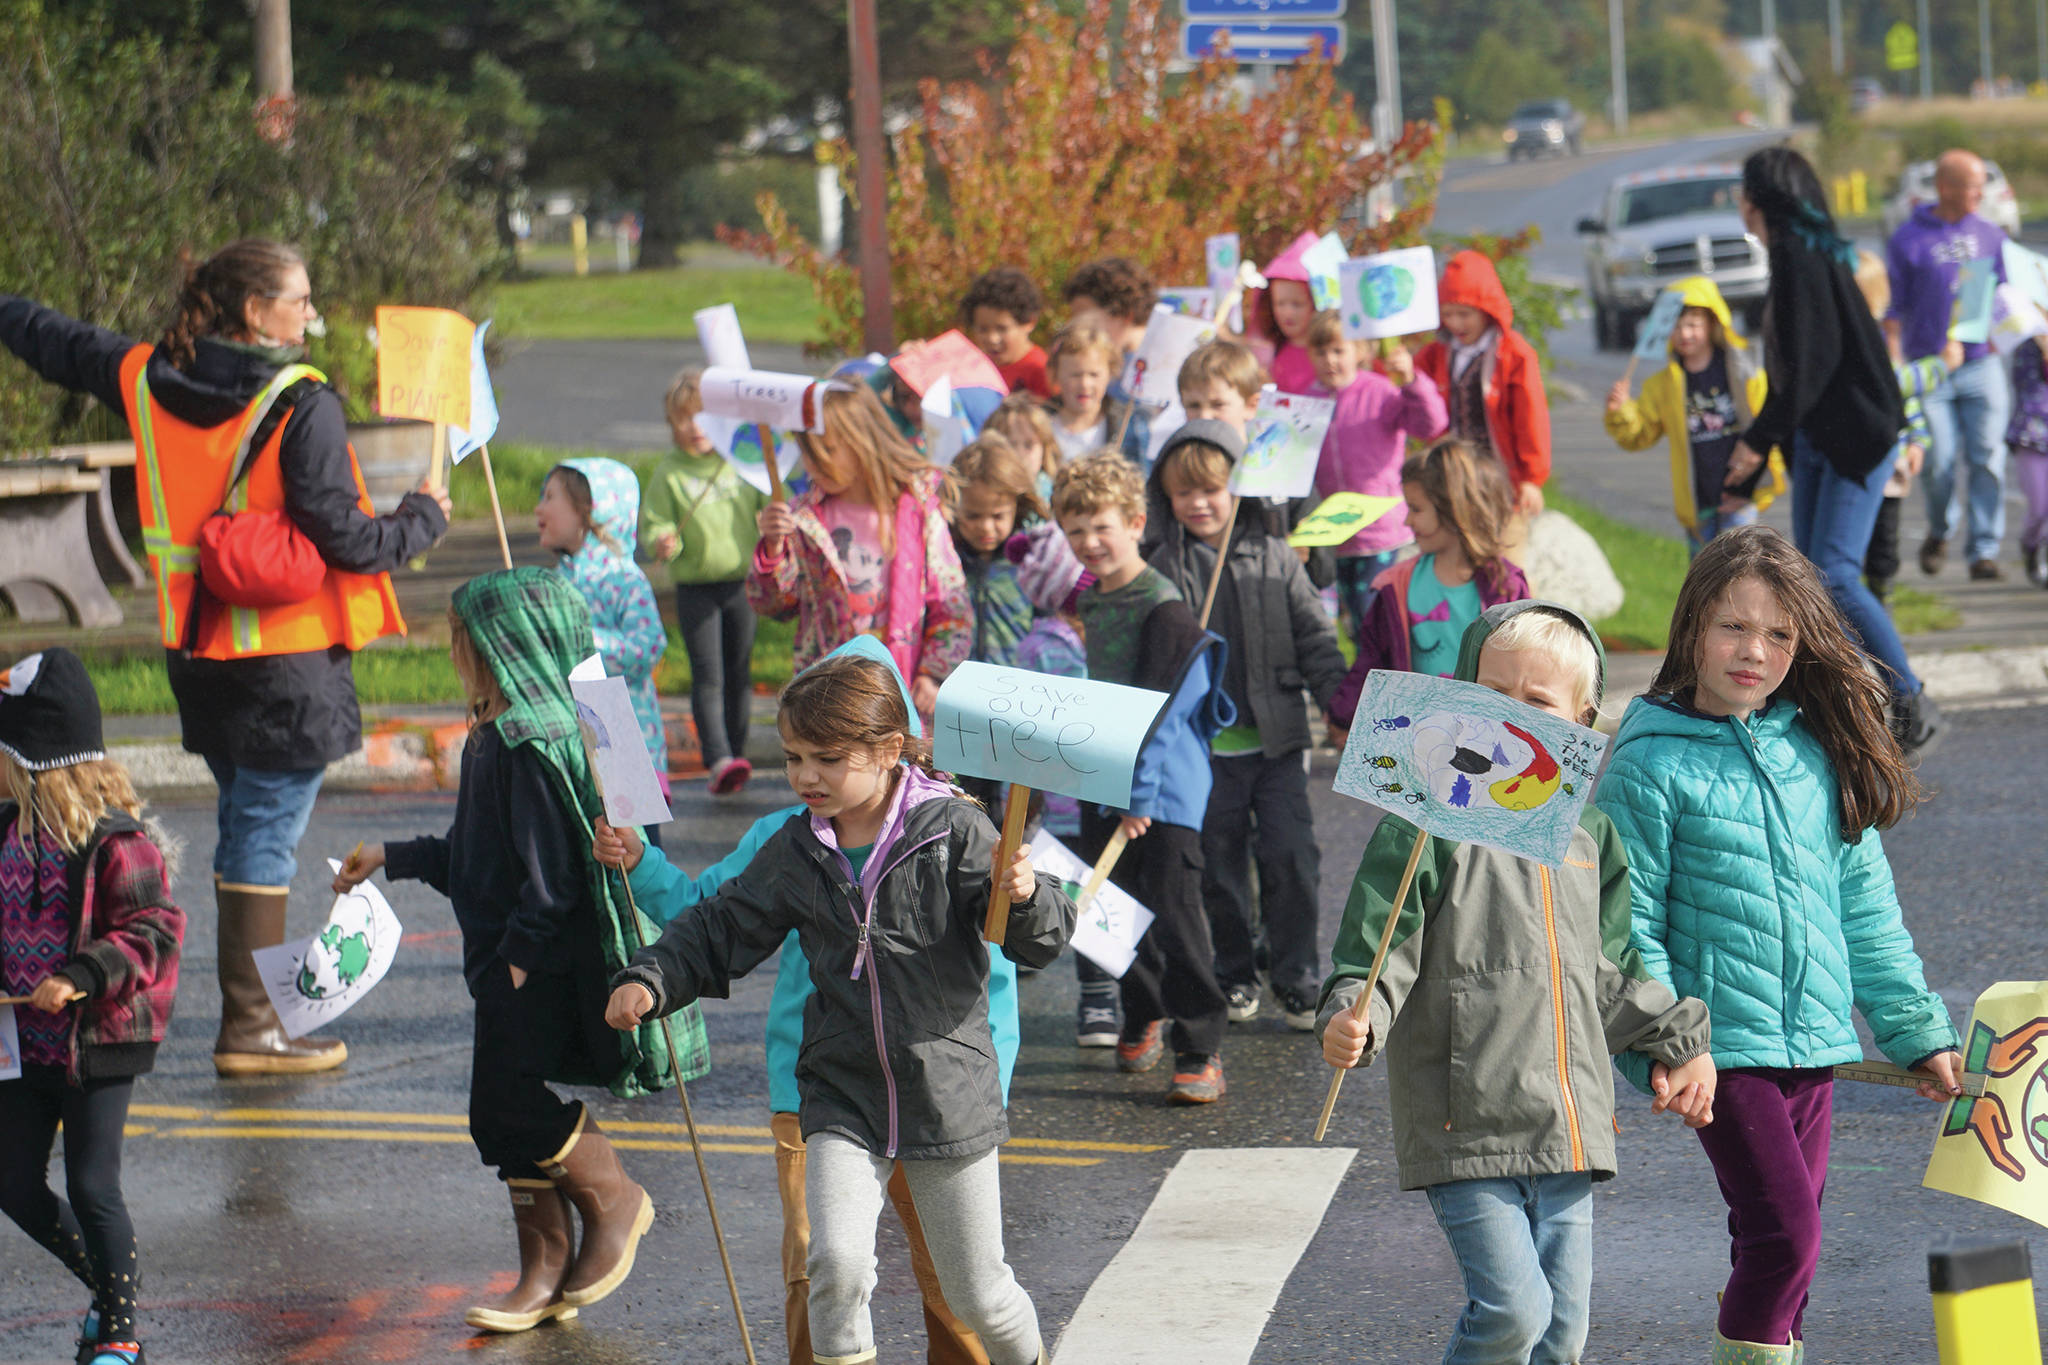 As part of their weekly Friday walks to local parks, Little Fireweed Academy students held a “We love the Earth March” to WKFL Park on Sept. 20, 2019, in Homer, Alaska. The kindergarten through second-grade students have been learning about ecology and animals and their connection to the earth. The march wasn’t associated with the Strike for the Climate held the same day. (Photo by Michael Armstrong/Homer News)